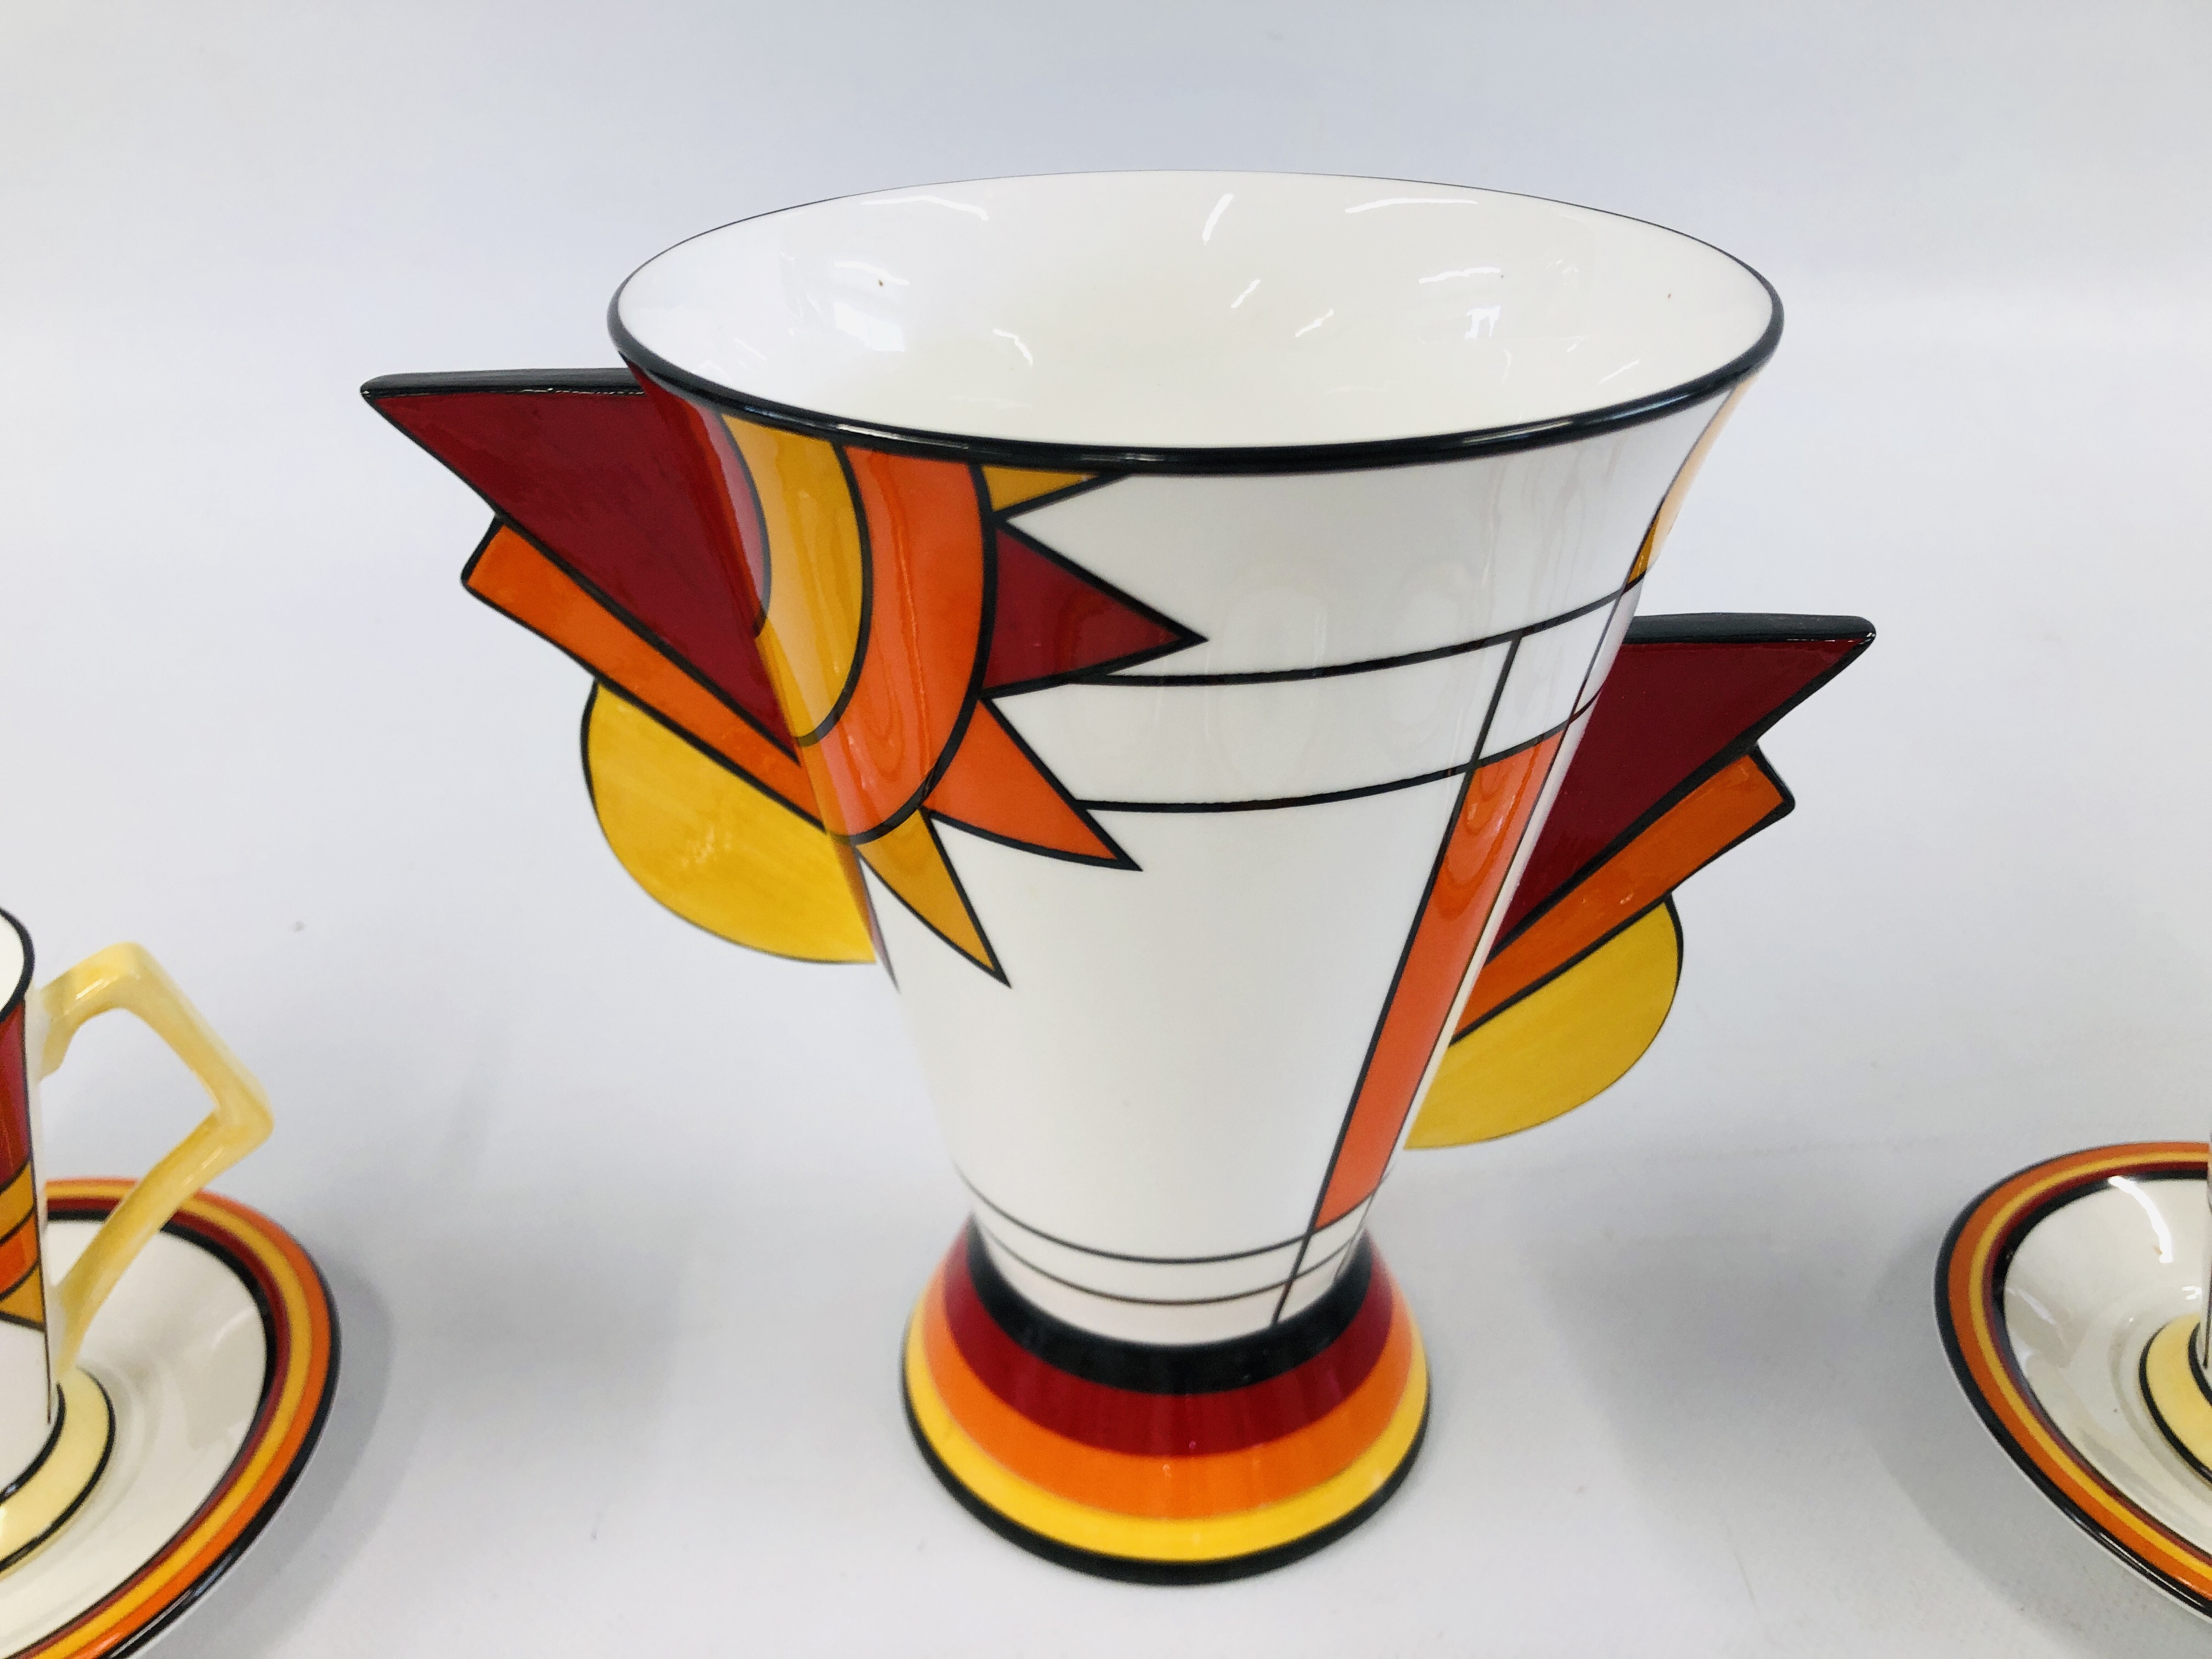 A MODERN ABSTRACT DESIGN 12 PIECE COFFEE CUP SET BY "THE BRIAN WOOD COLLECTION" ALONG WITH A LARGE - Image 2 of 7